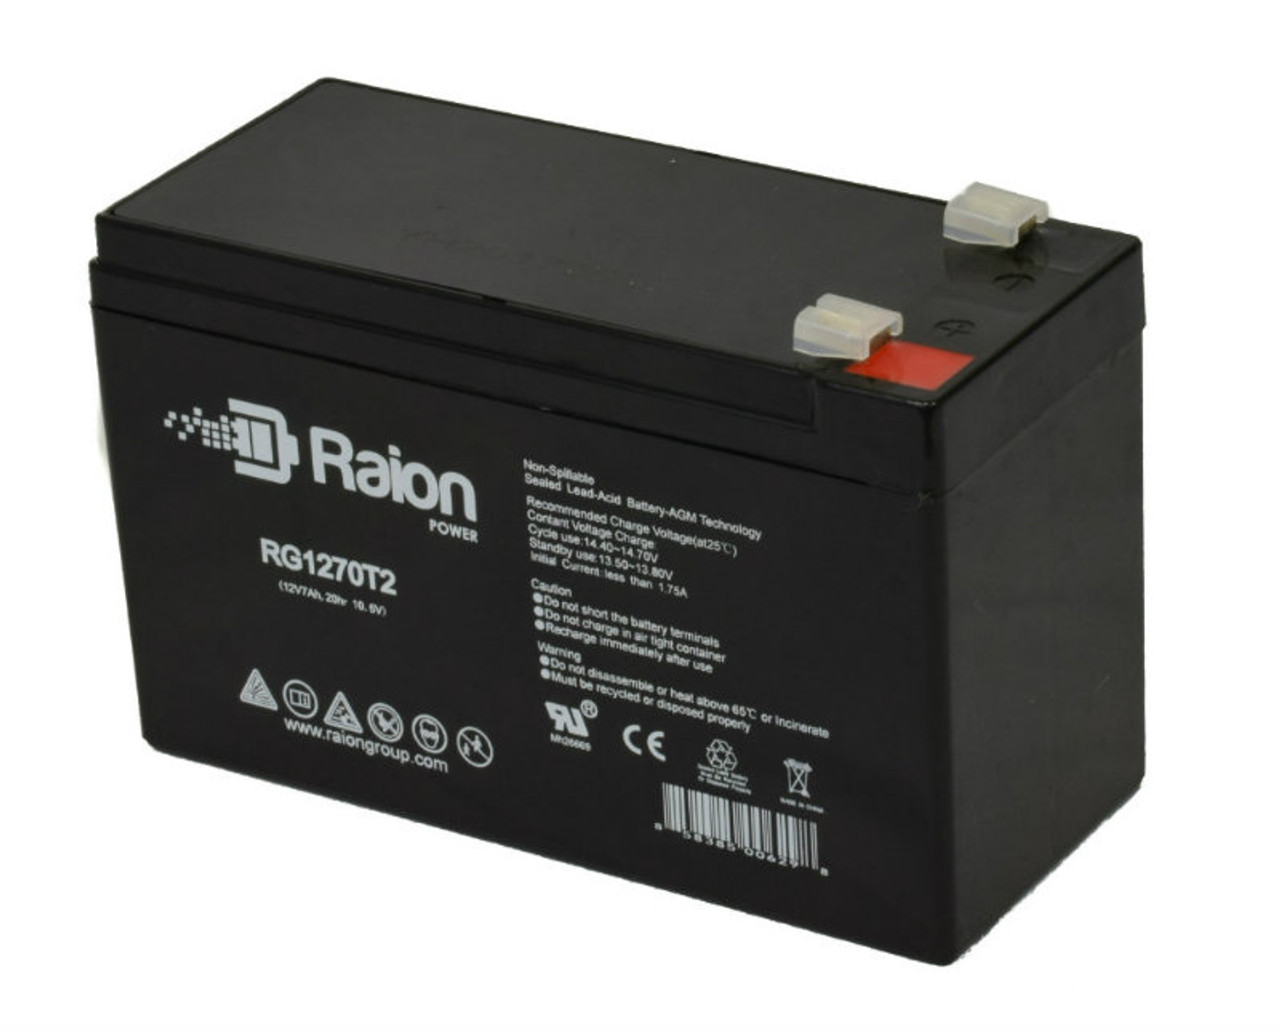 Raion Power Replacement 12V 7Ah RG1270T1 Fire Alarm Battery for Altronix LPS5C24X